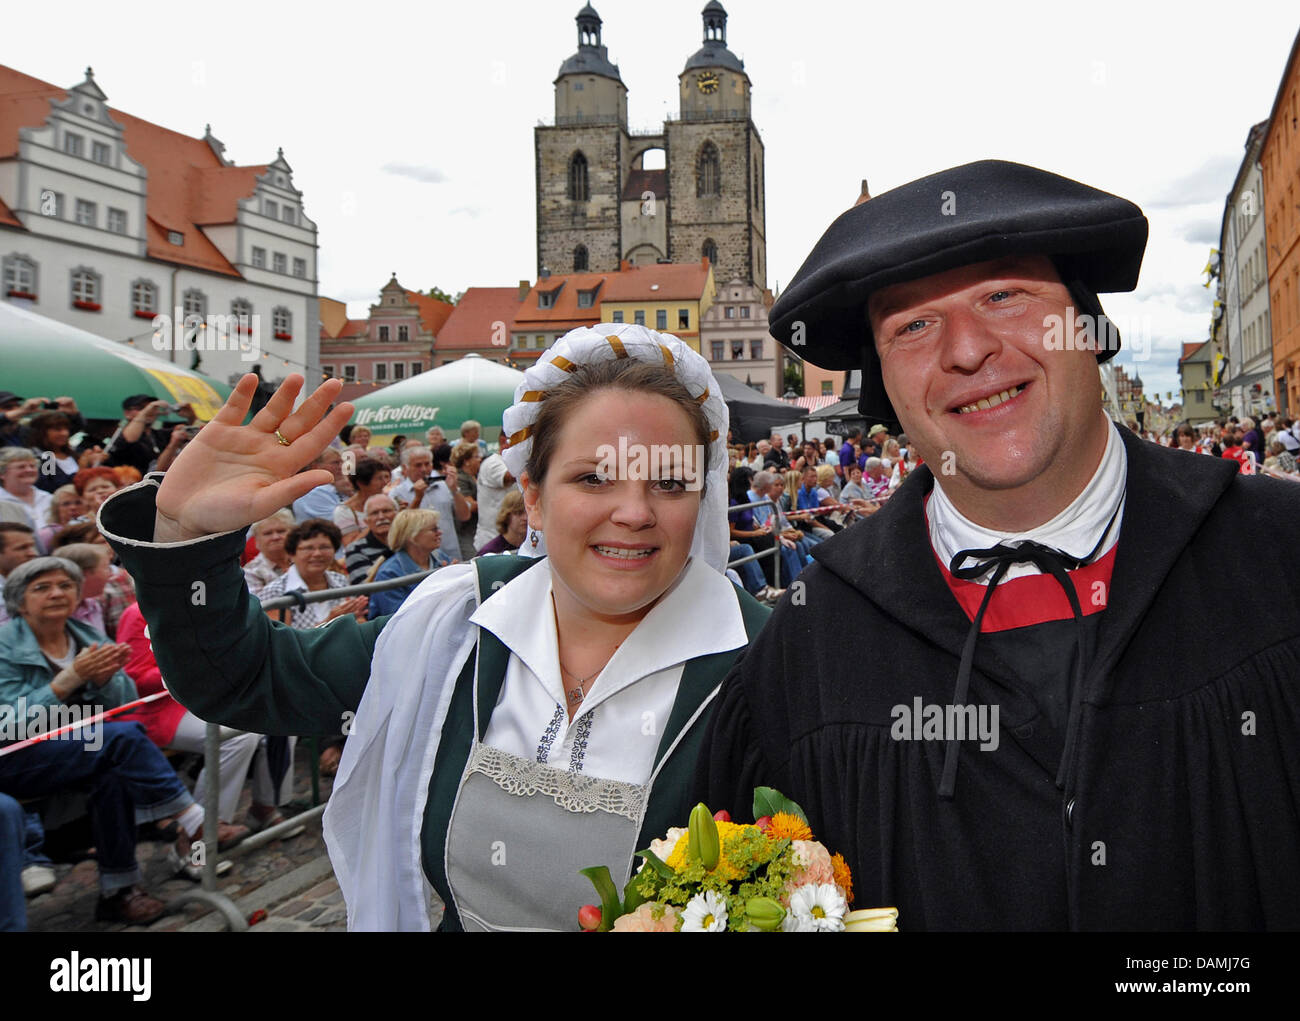 The couple Franziska Kuehnemann and Torsten Lange act as Luther couple, performing the wedding of theologist and reformer Martin Luther and nun Katharina of Bora, during the pageant in front of the city's church in Wittenberg, Germany, 18 June 2011. Franziska Kuehnemann is a direct descendant of Luther in the 15th generation. Luther's wedding in 1525 has been celebrated since 1994  Stock Photo